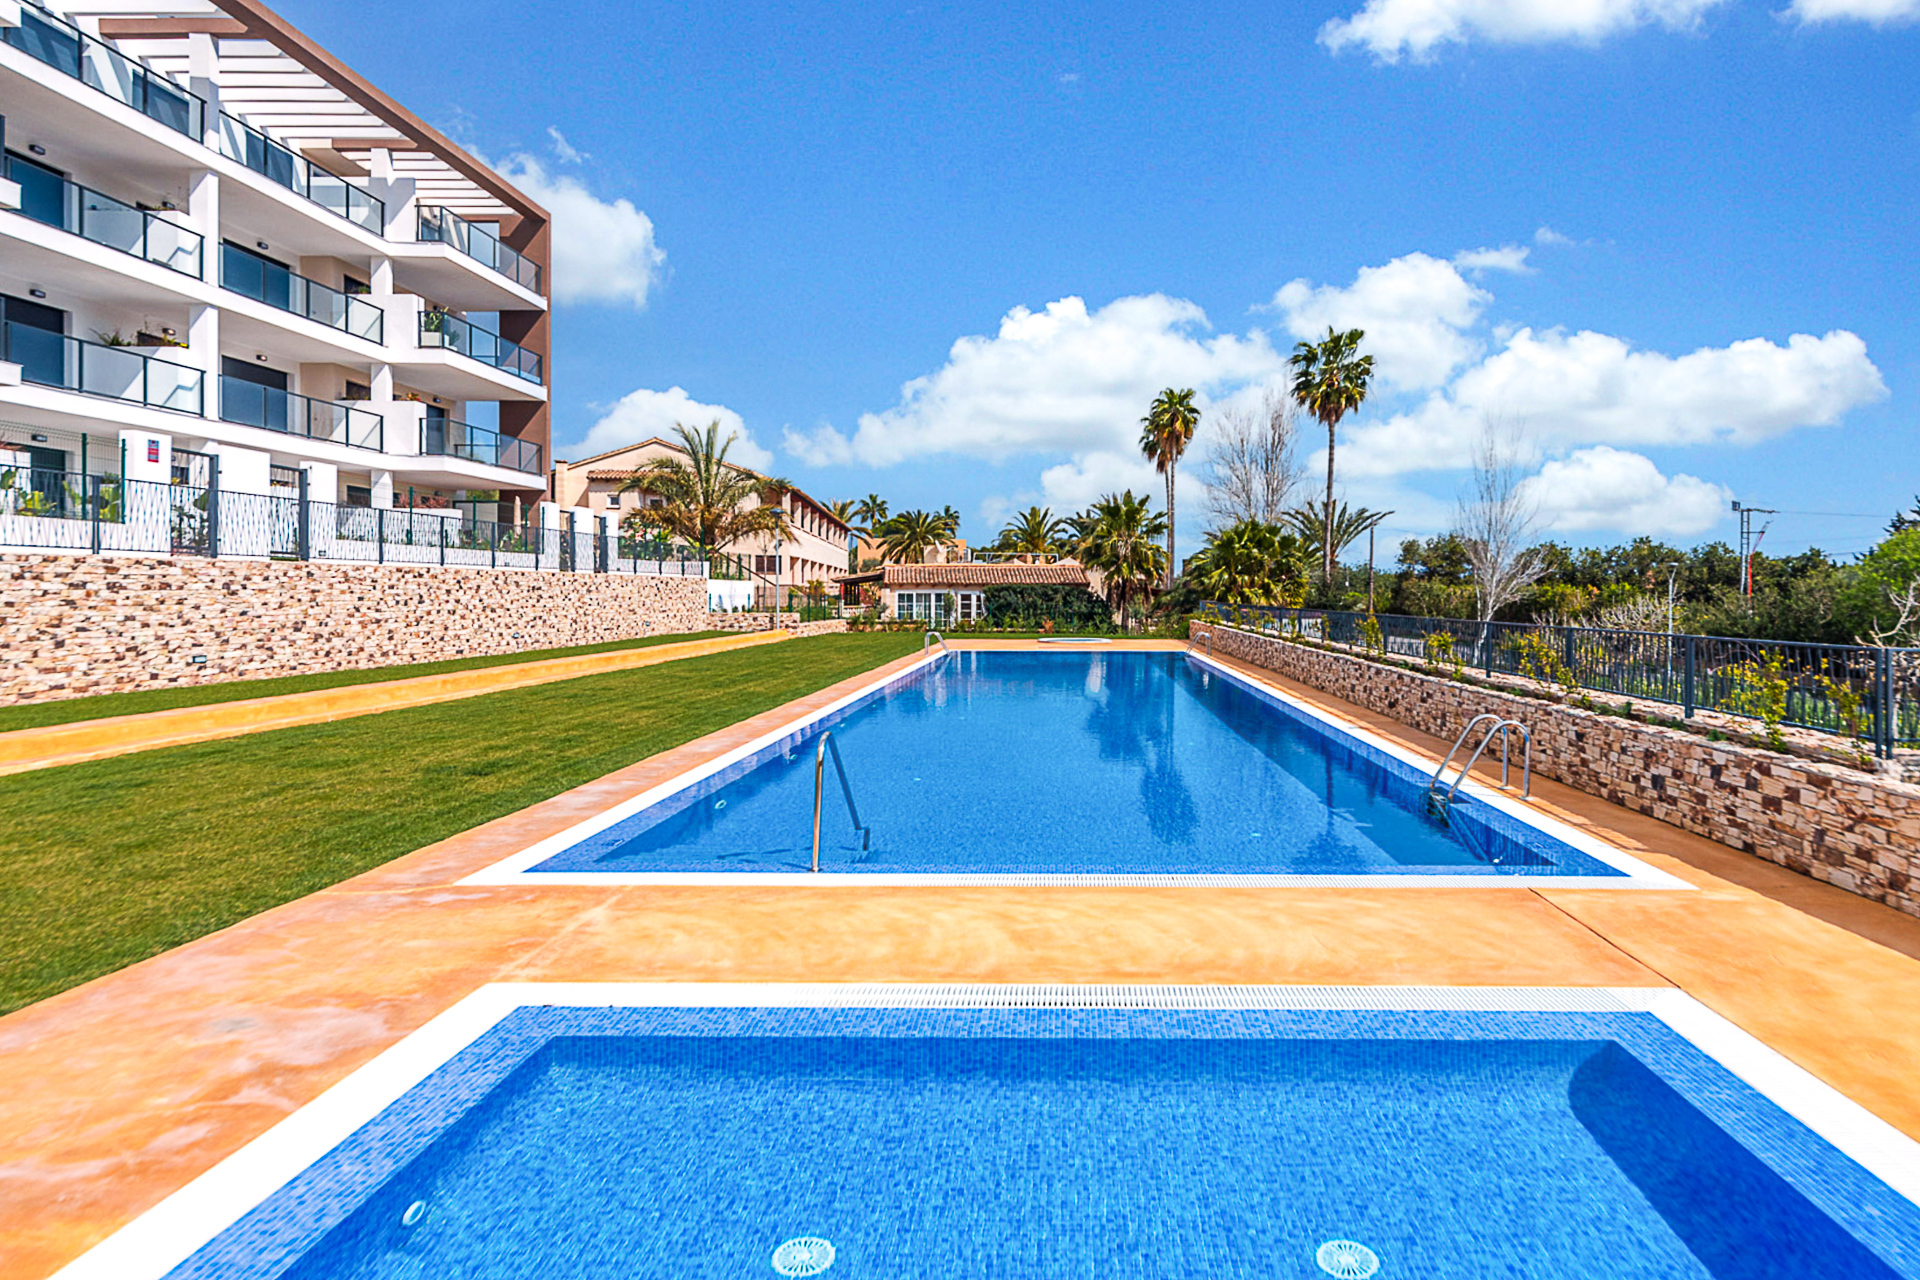 New build: Last exclusive ground floor apartment with 3 bedrooms, private garden and communal pool, 07589 Font de Sa Cala (Spain), Ground floor apartment